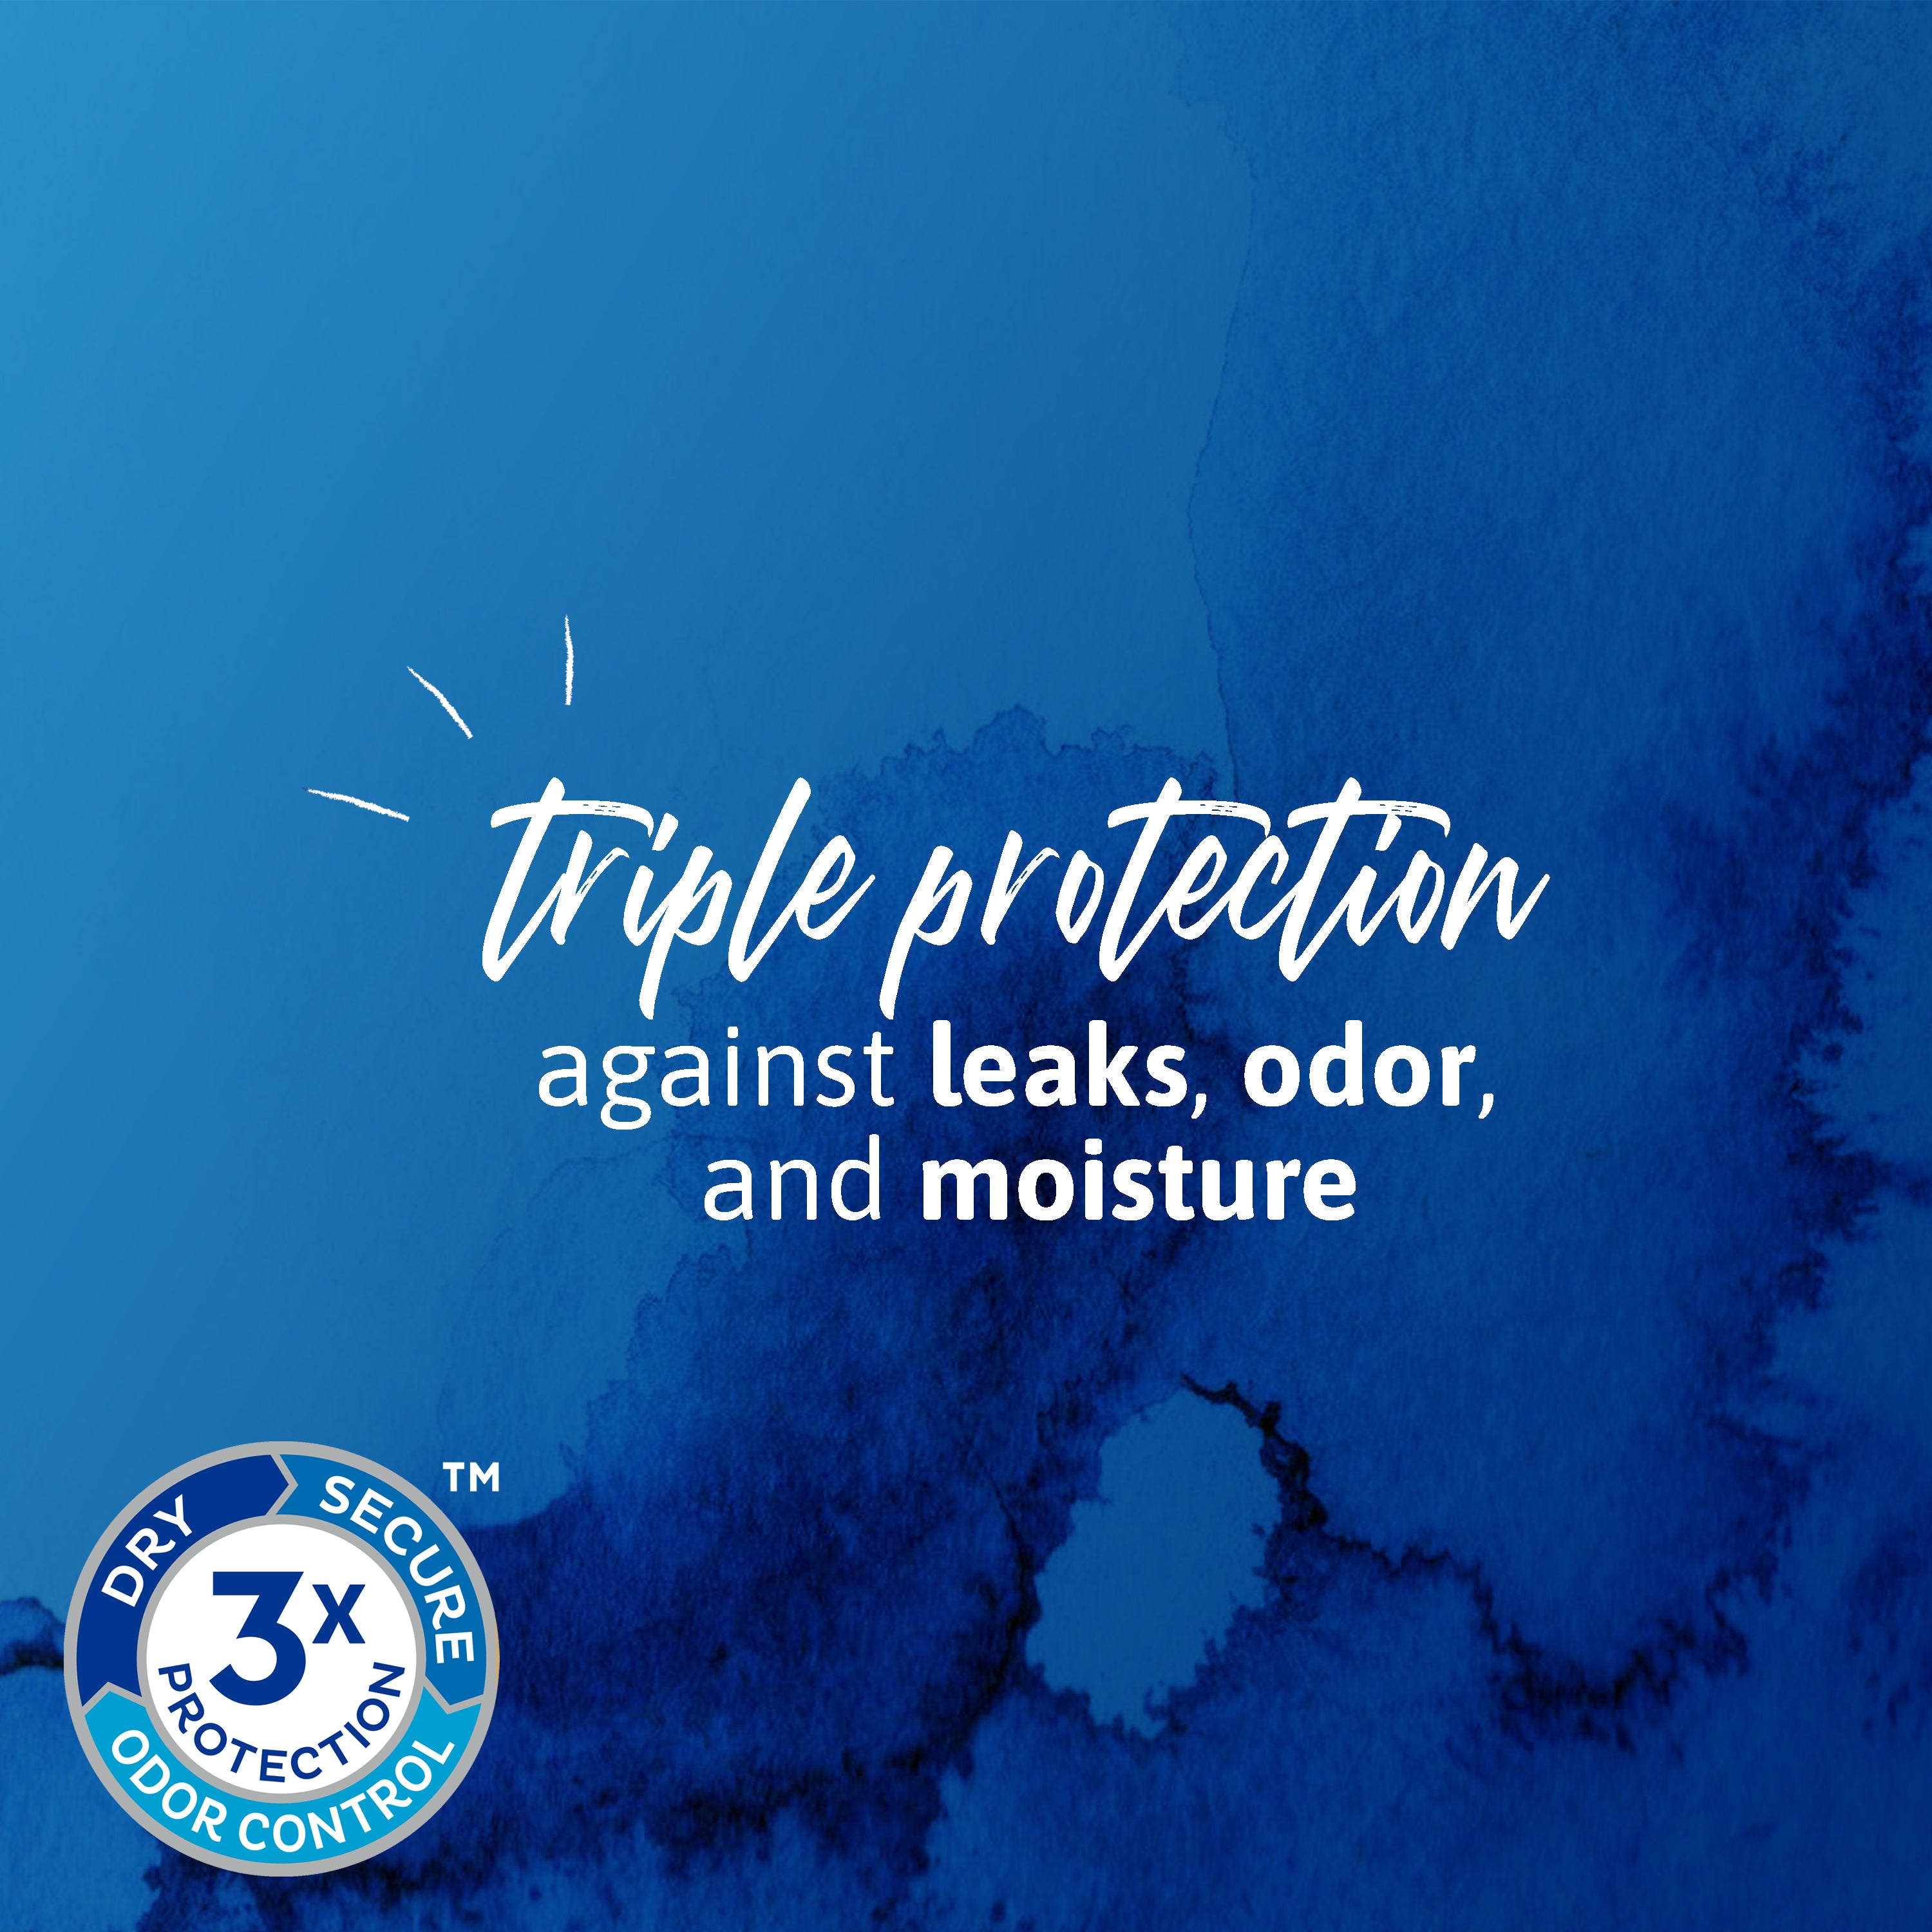 Words, Triple protection against leaks, odor and moisture on a blue background